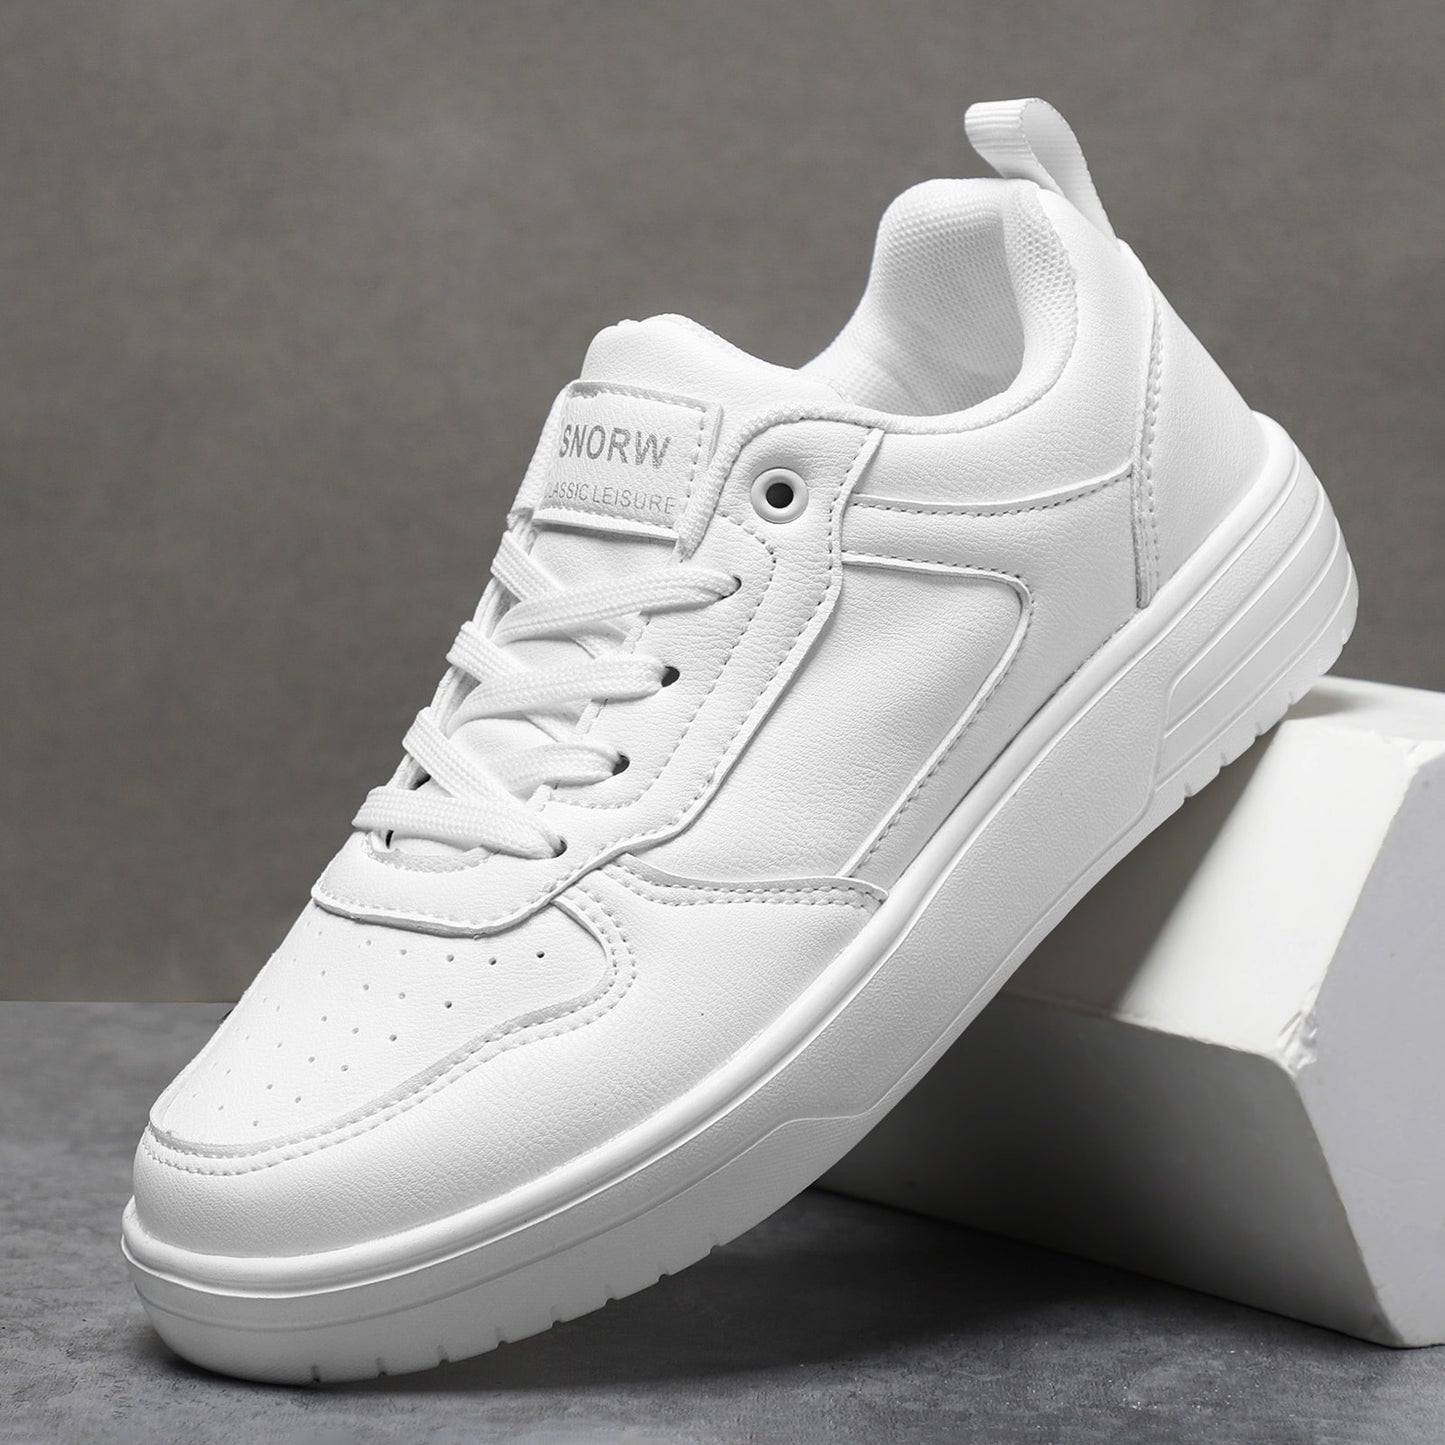 Couple style lightweight EVA classic sports white shoes